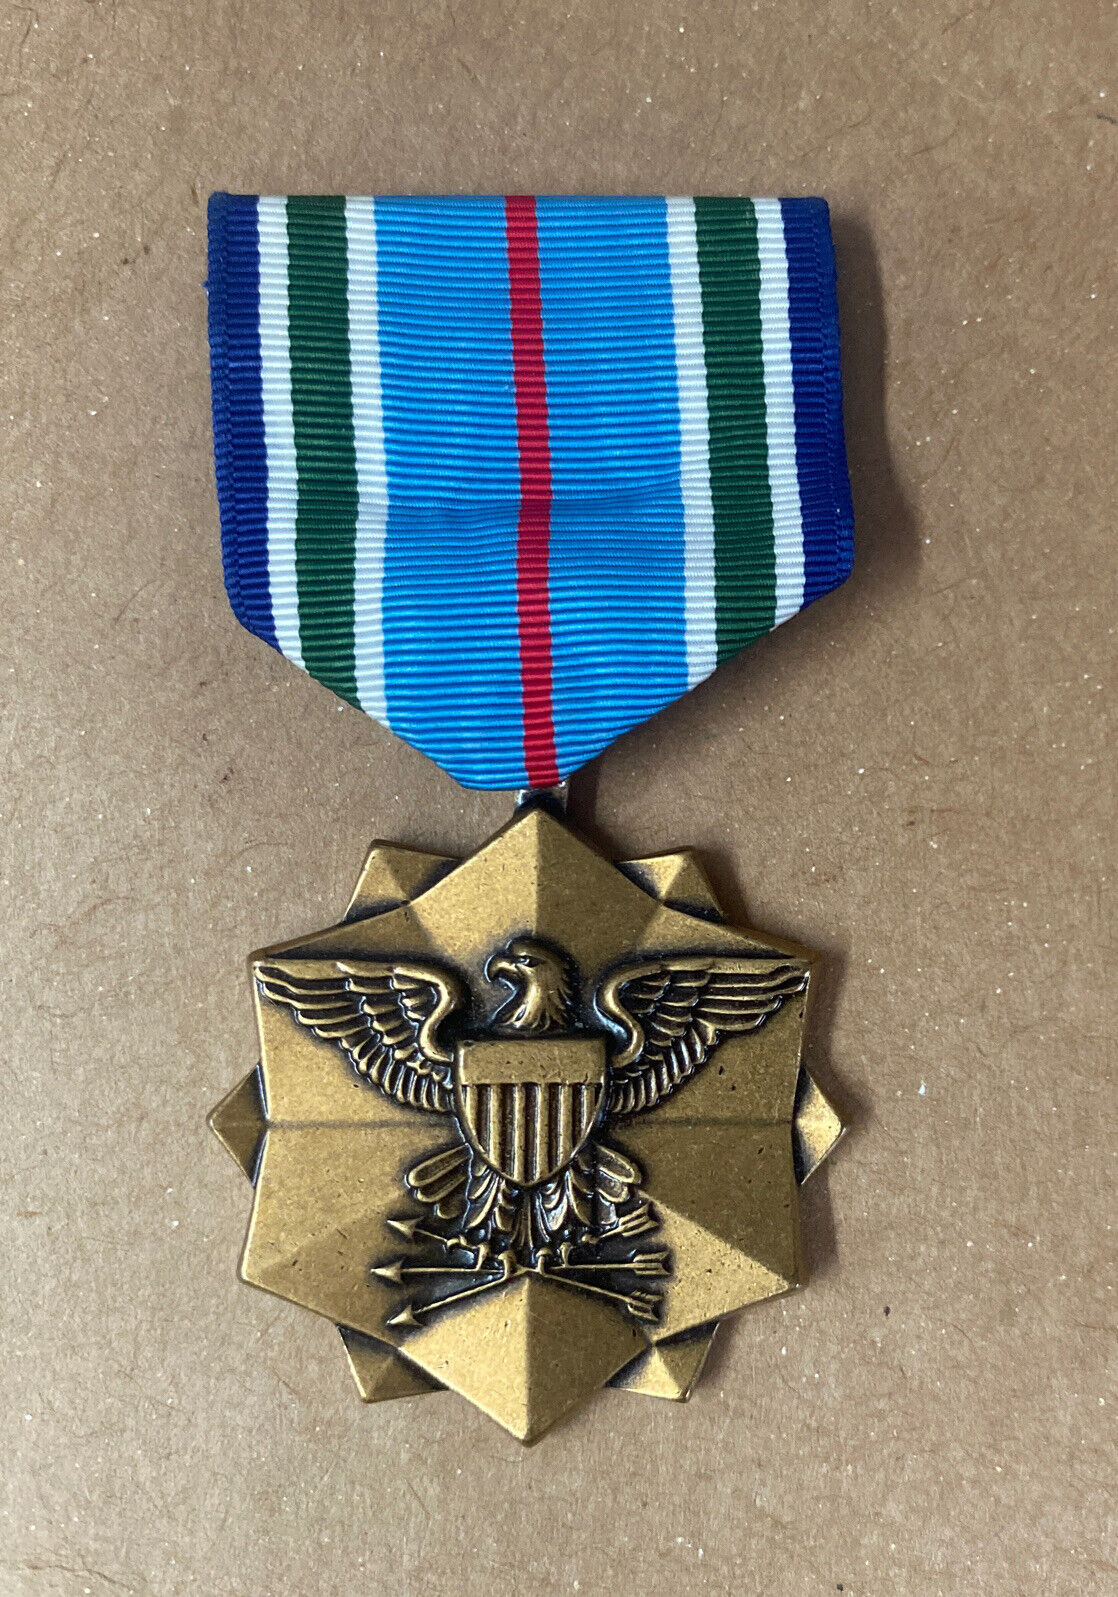 Authentic Used US Army Military JOINT SERVICE ACHIEVEMENT AWARD Medal Ribbon